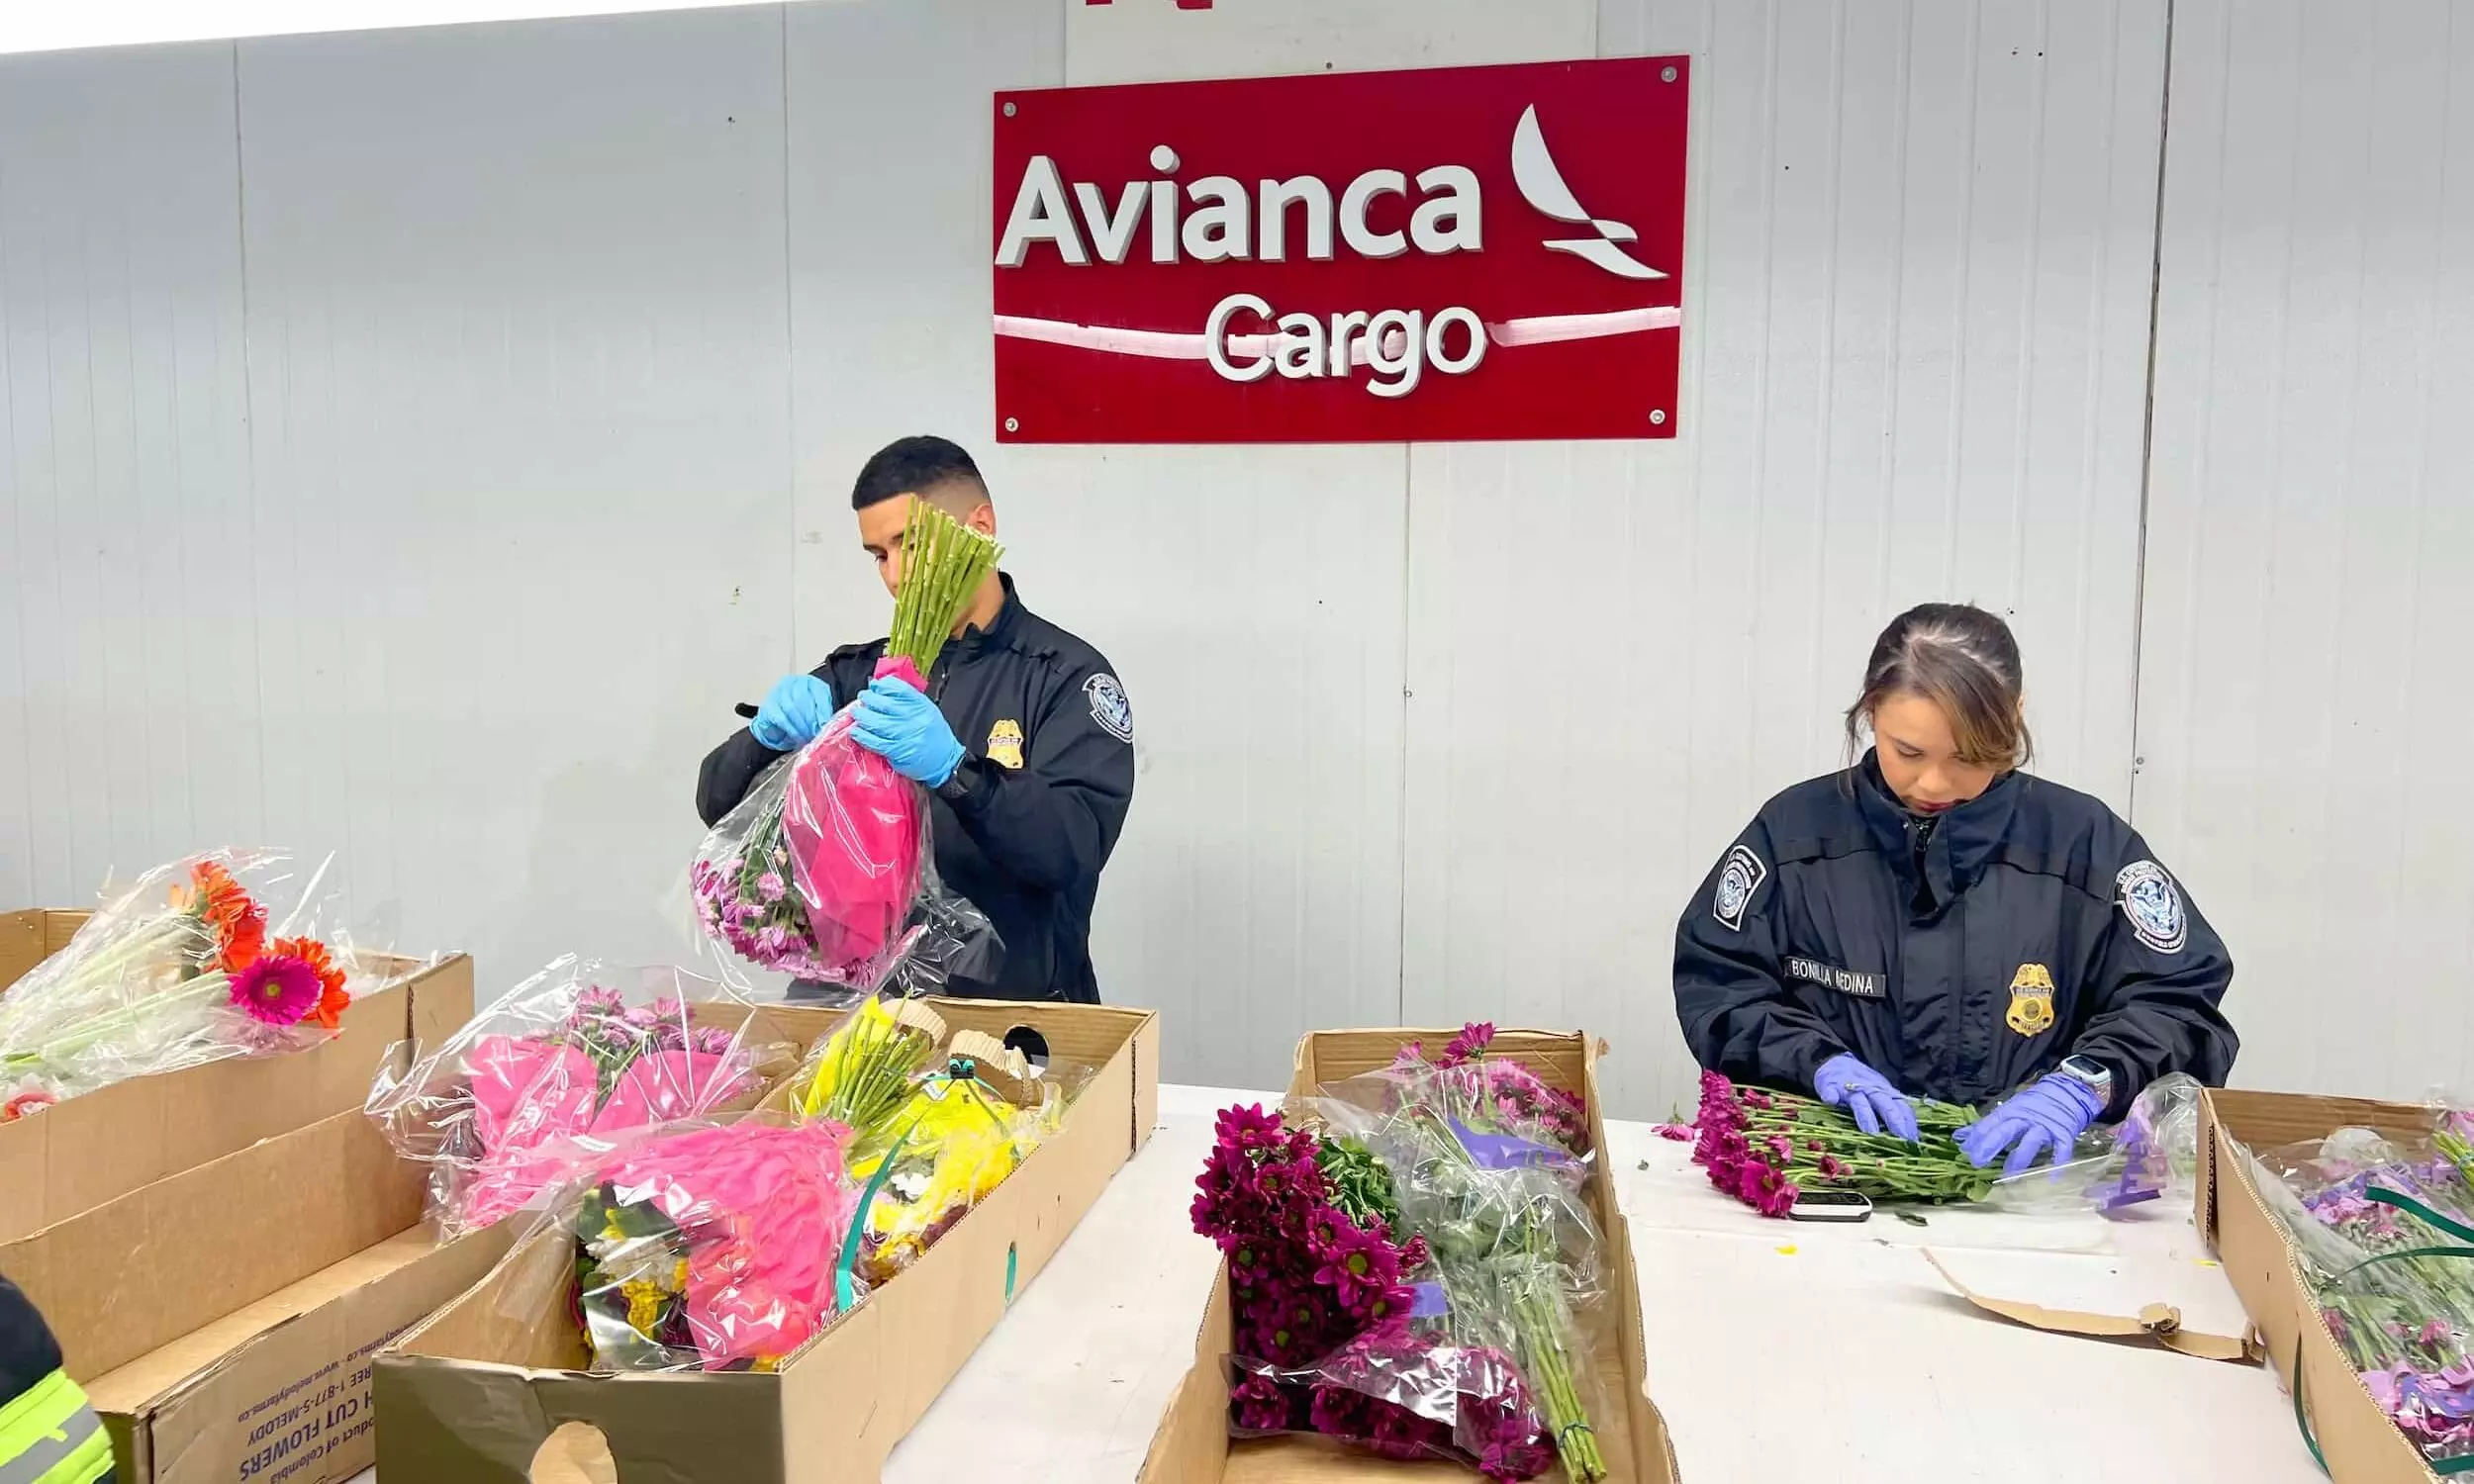 Avianca Cargo transports more than 400mn flower stems to US